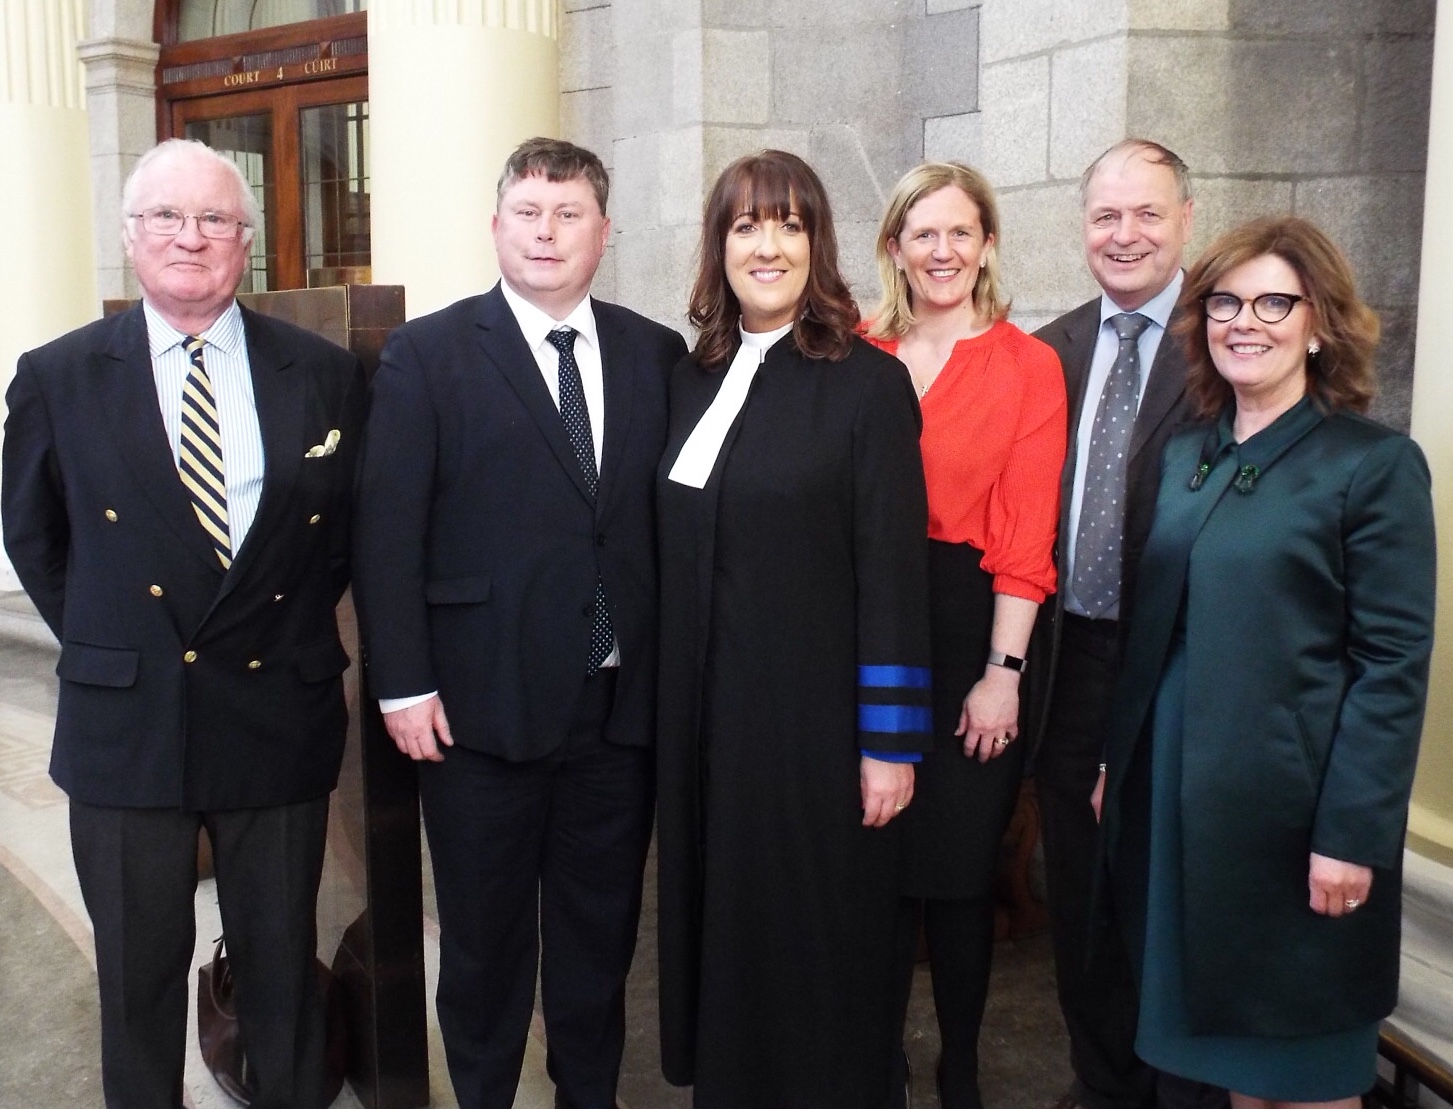 Judge Carthy is pictured with her former partners Patrick Reidy, Andrew Cody, Elaine Cox, Tome Stafford and Eva O'Brien